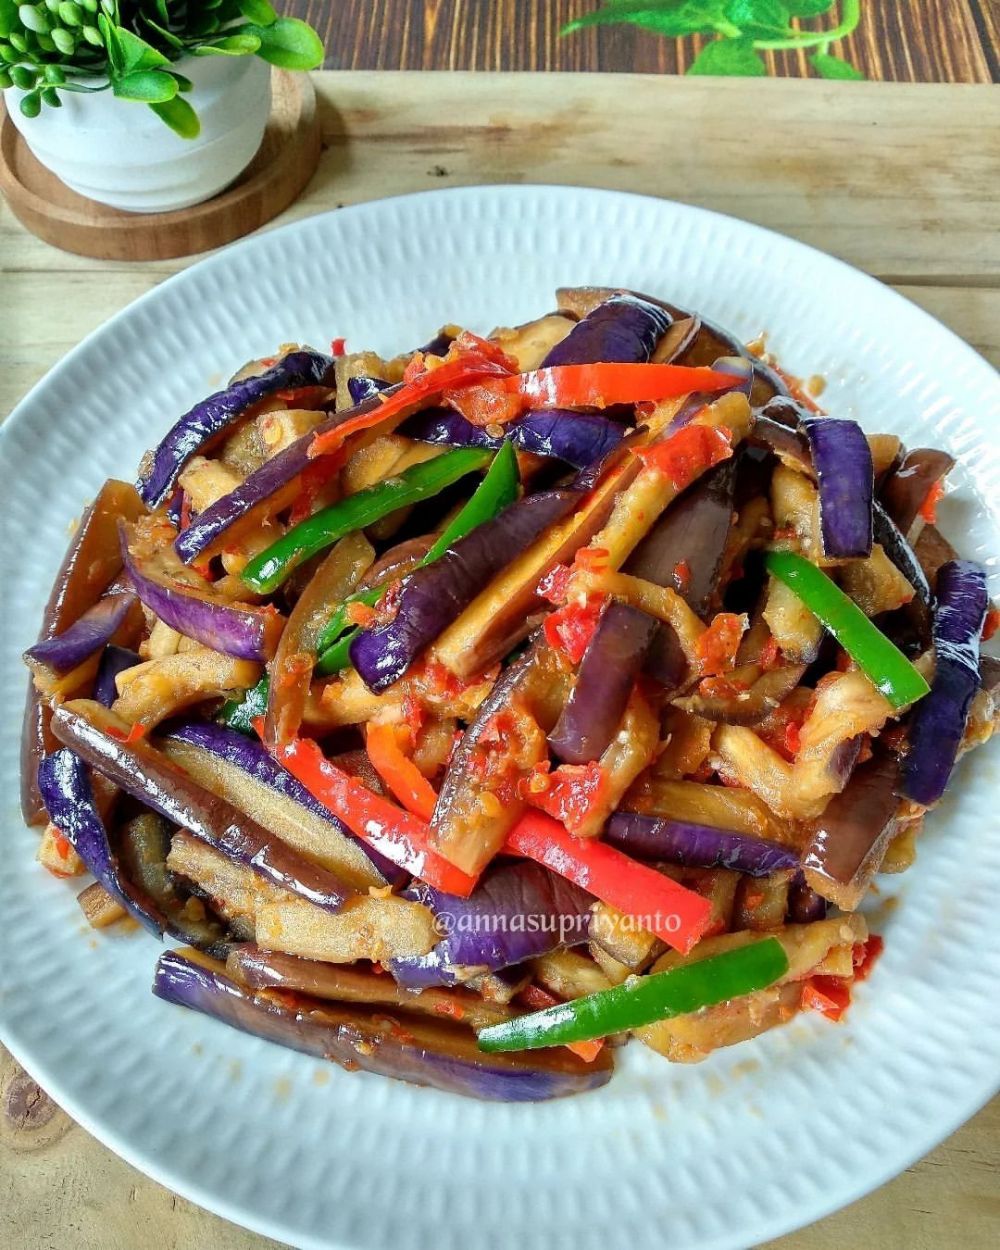 Recipe for stir-fried eggplant mixed with peppers, delicious, tasty and addictive